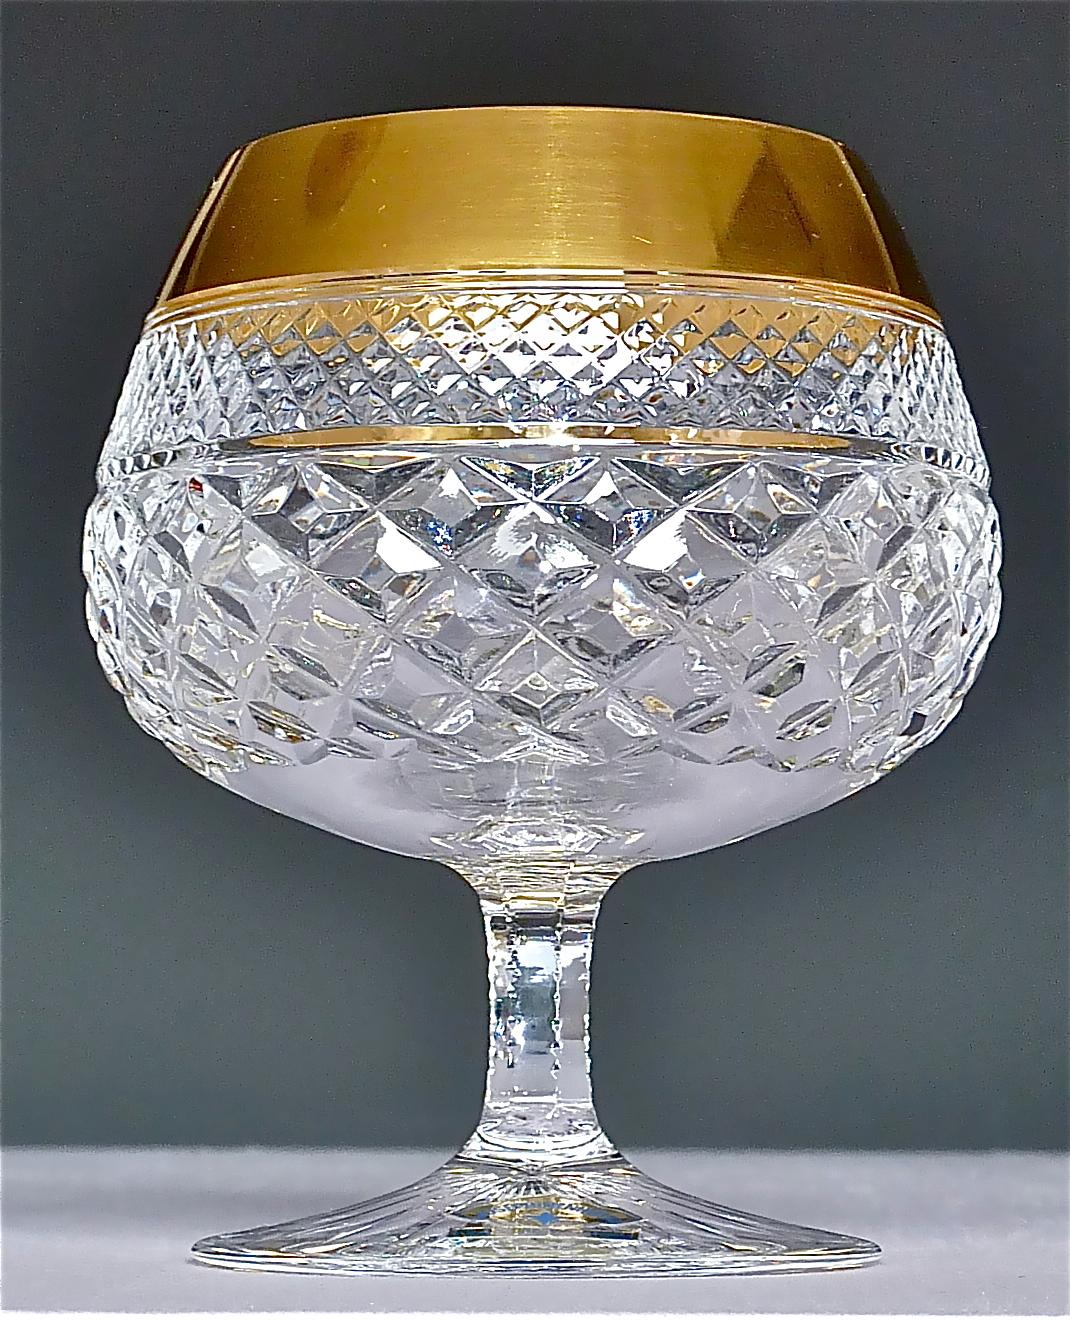 Gorgeous 20th century handcrafted faceted crystal glass set with 24-carat gold rim made by Josephinenhütte Moser circa 1960-1970 and very in the style of the exclusive French company Baccarat or Saint Louis thistle. This exquisite set of 6 cognac